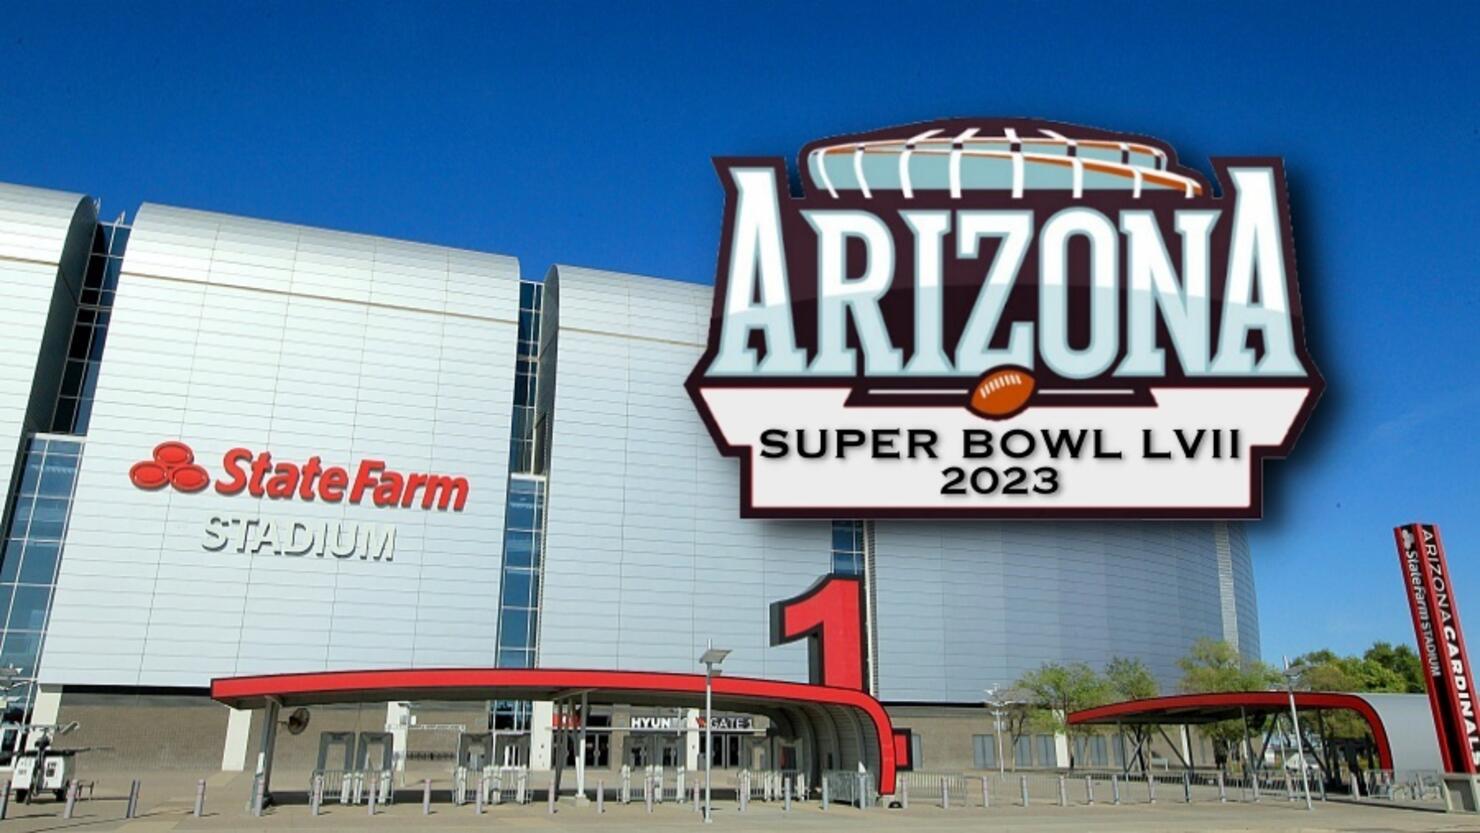 The 2023 Super Bowl Will Be Played At State Farm Stadium In Arizona